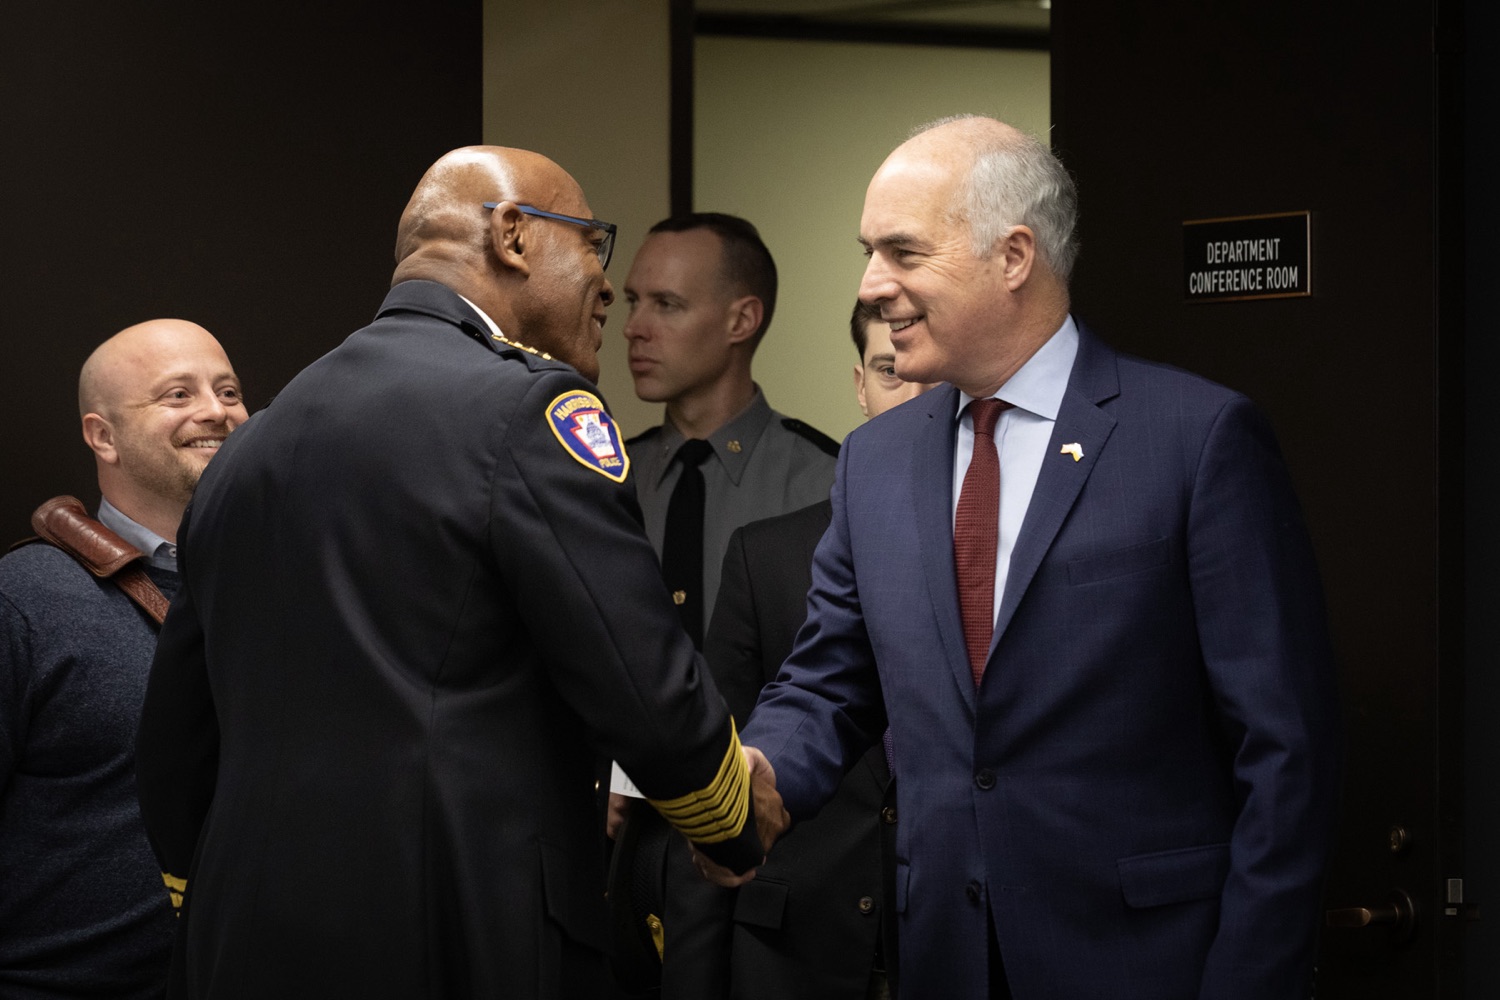 Senator Bob Casey visited Pennsylvania State Police Headquarters to discuss his proposed Stop Fentanyl at the Border Act. Pictured here is a moment from the event. Harrisburg, Pennsylvania.<br><a href="https://filesource.amperwave.net/commonwealthofpa/photo/24347_psp_stopFentanyl_JP_01.jpg" target="_blank">⇣ Download Photo</a>